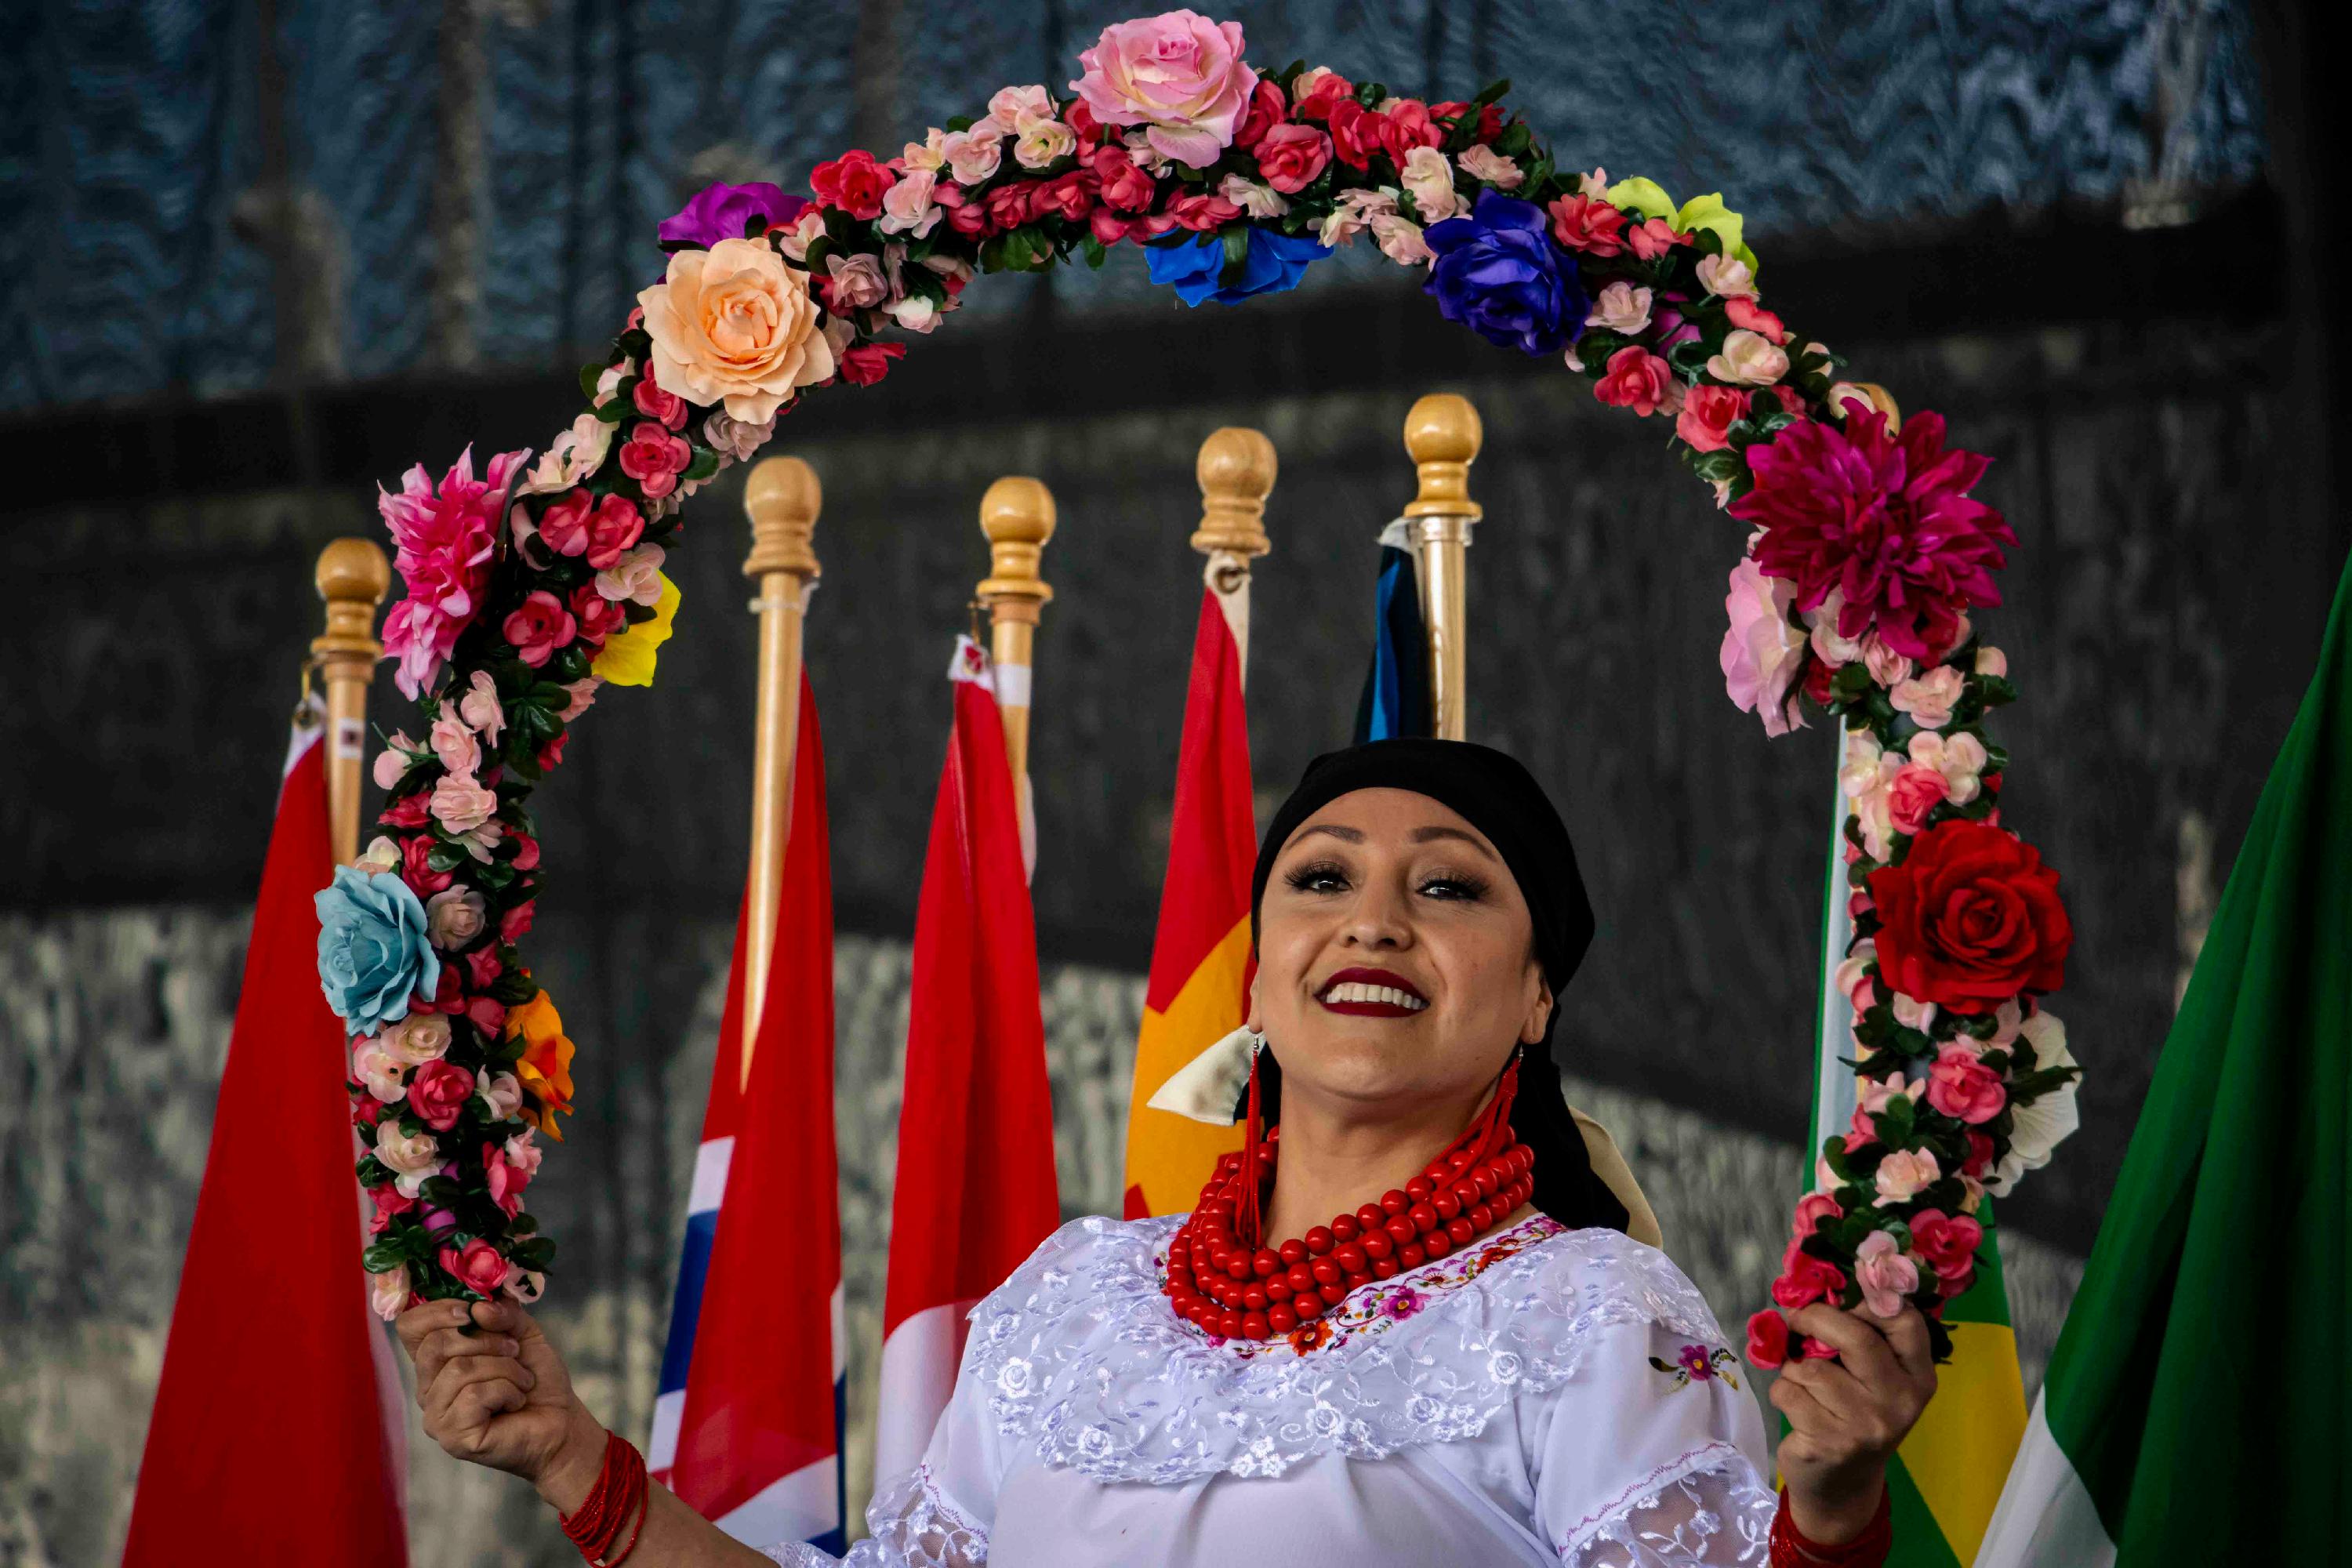 A member of the Ecuadorian Society holds a floral wreath at Worldfest 2022